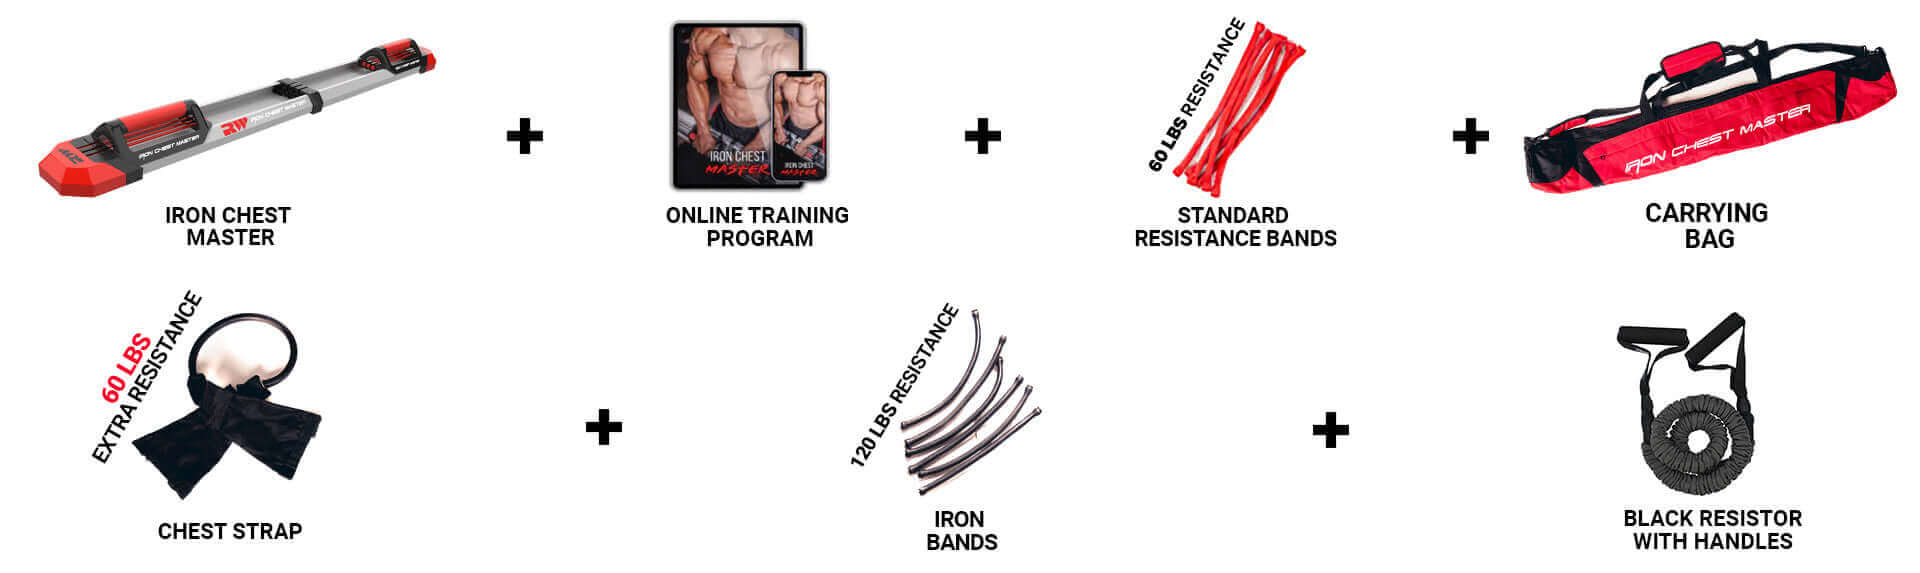 Iron Chest Master® Fitness System